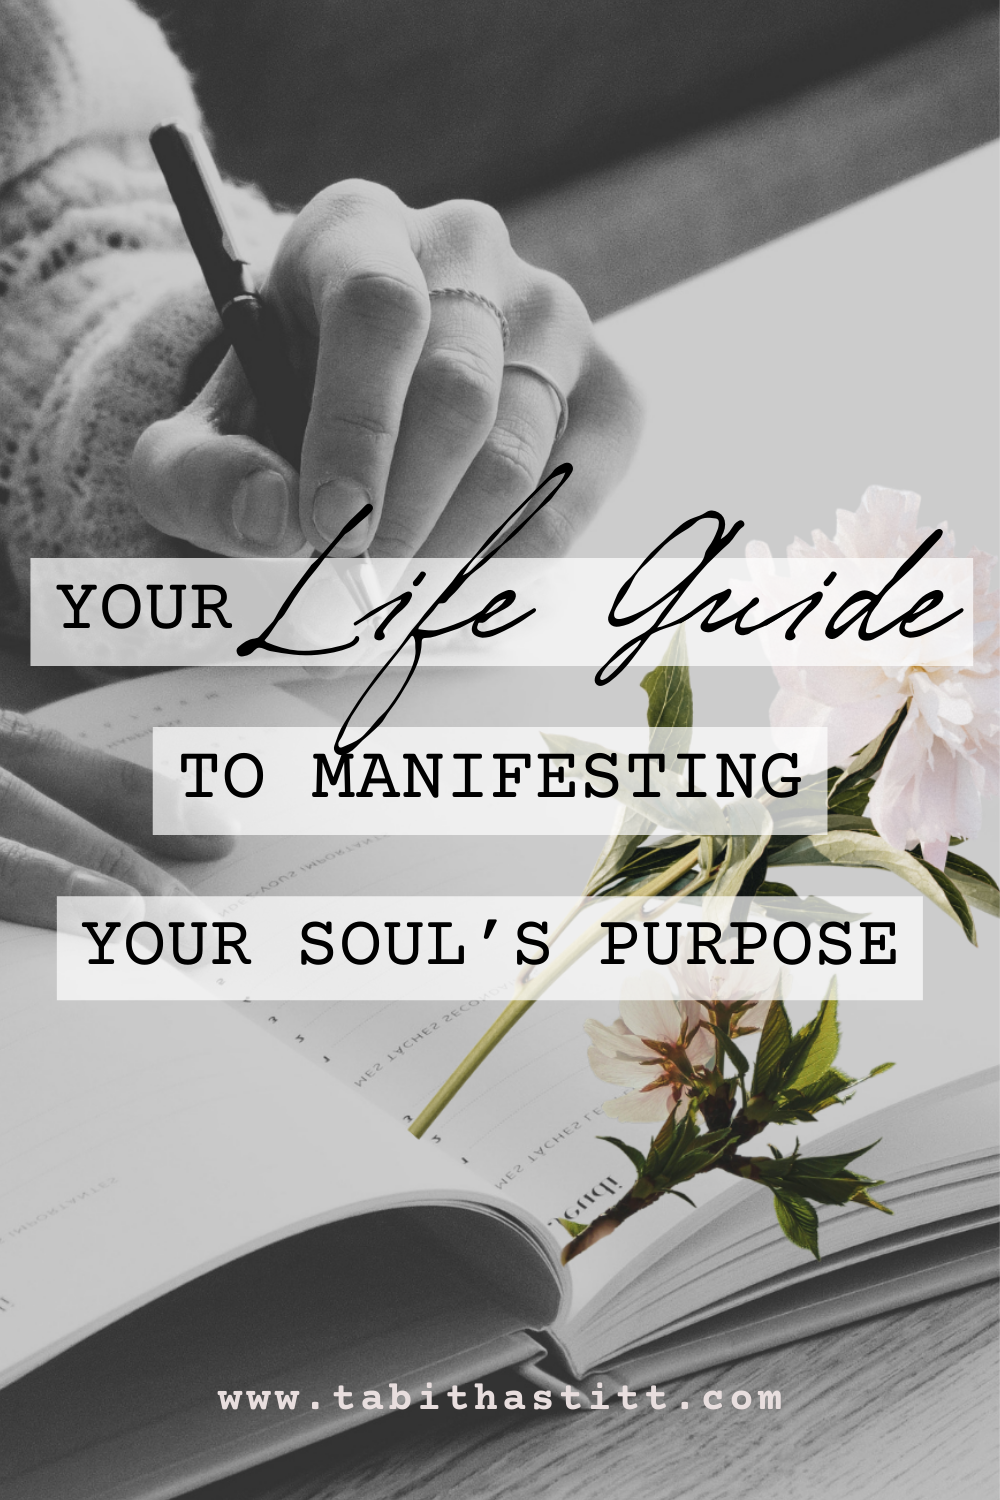 Your Life Guide to Manifesting Your Soul's Purpose by Tabitha Stitt The Self Help Psychic